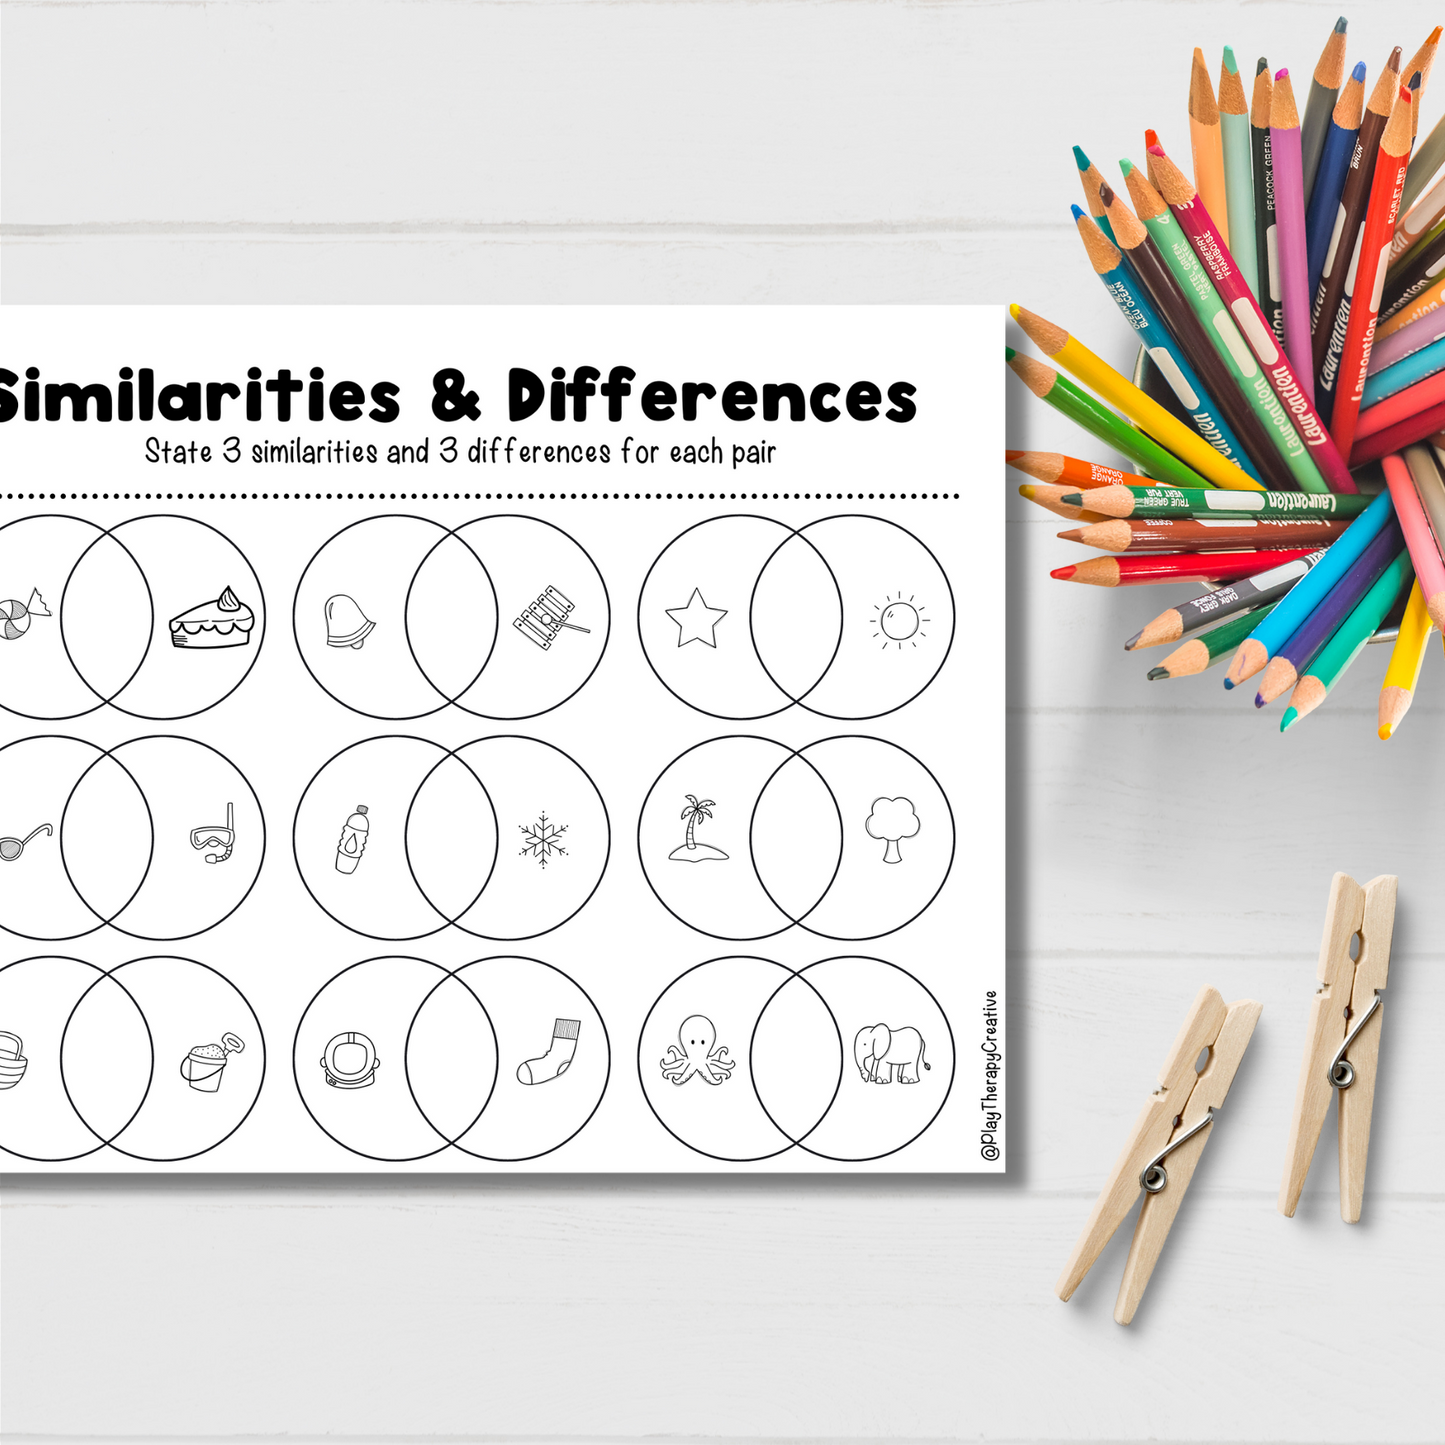 Similarities & Differences / Compare & Contrast Worksheet for Speech & Language